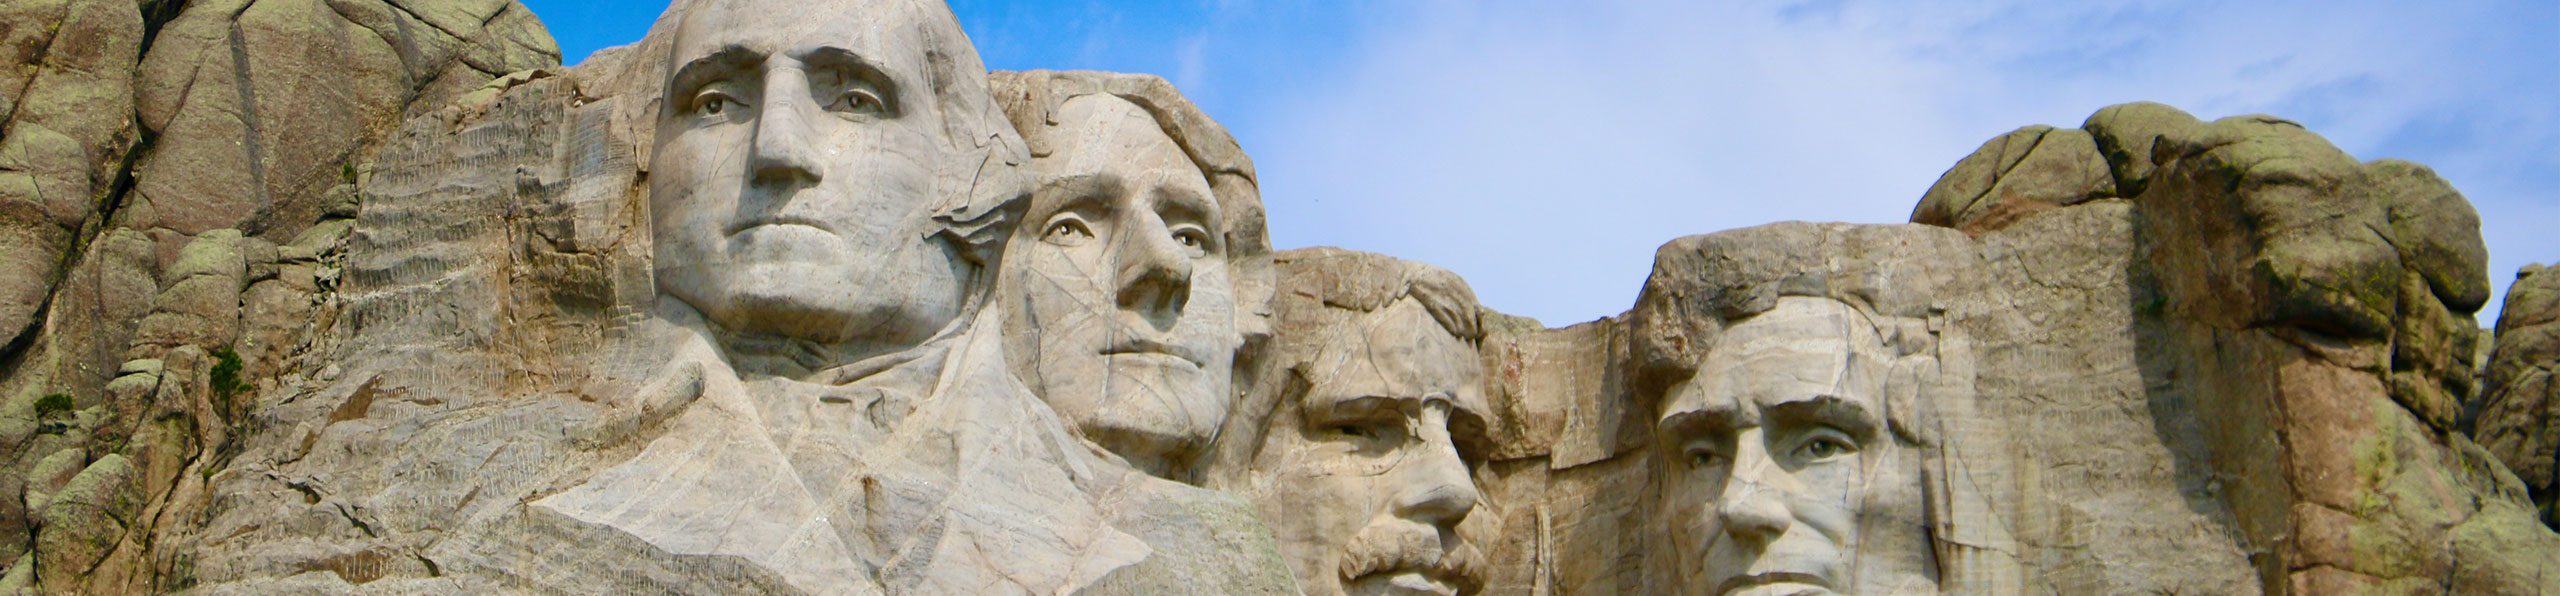 faces of mount rushmore